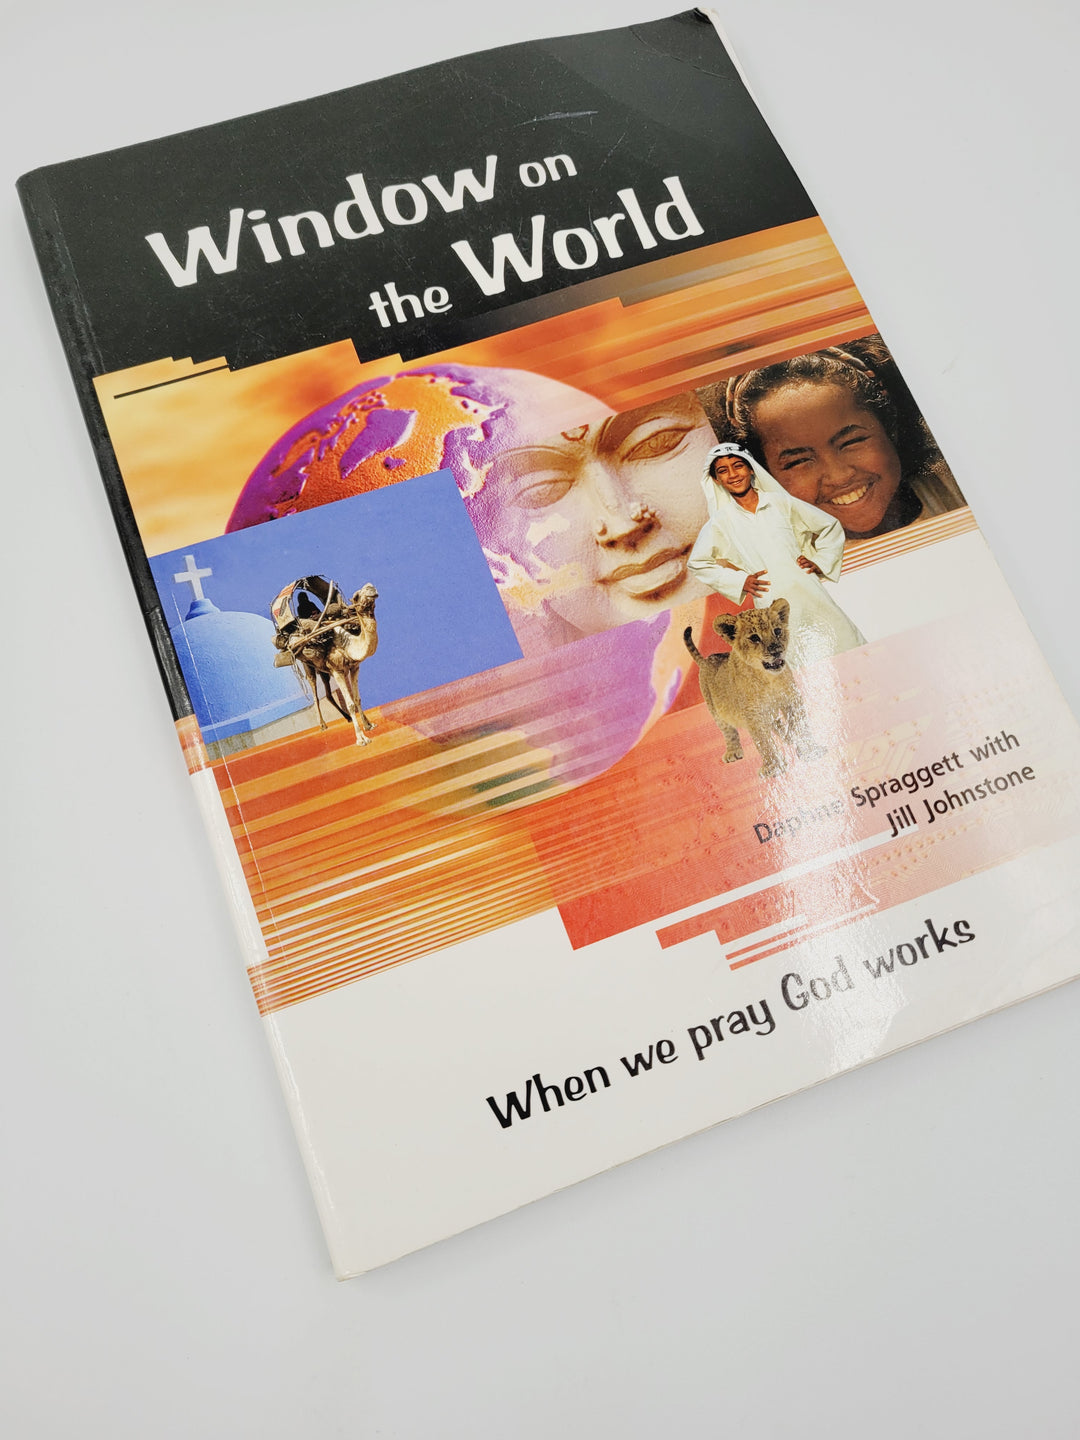 WINDOW ON THE WORLD WHEN WE PRAY GOD WORKS LARGE BOOK EUC